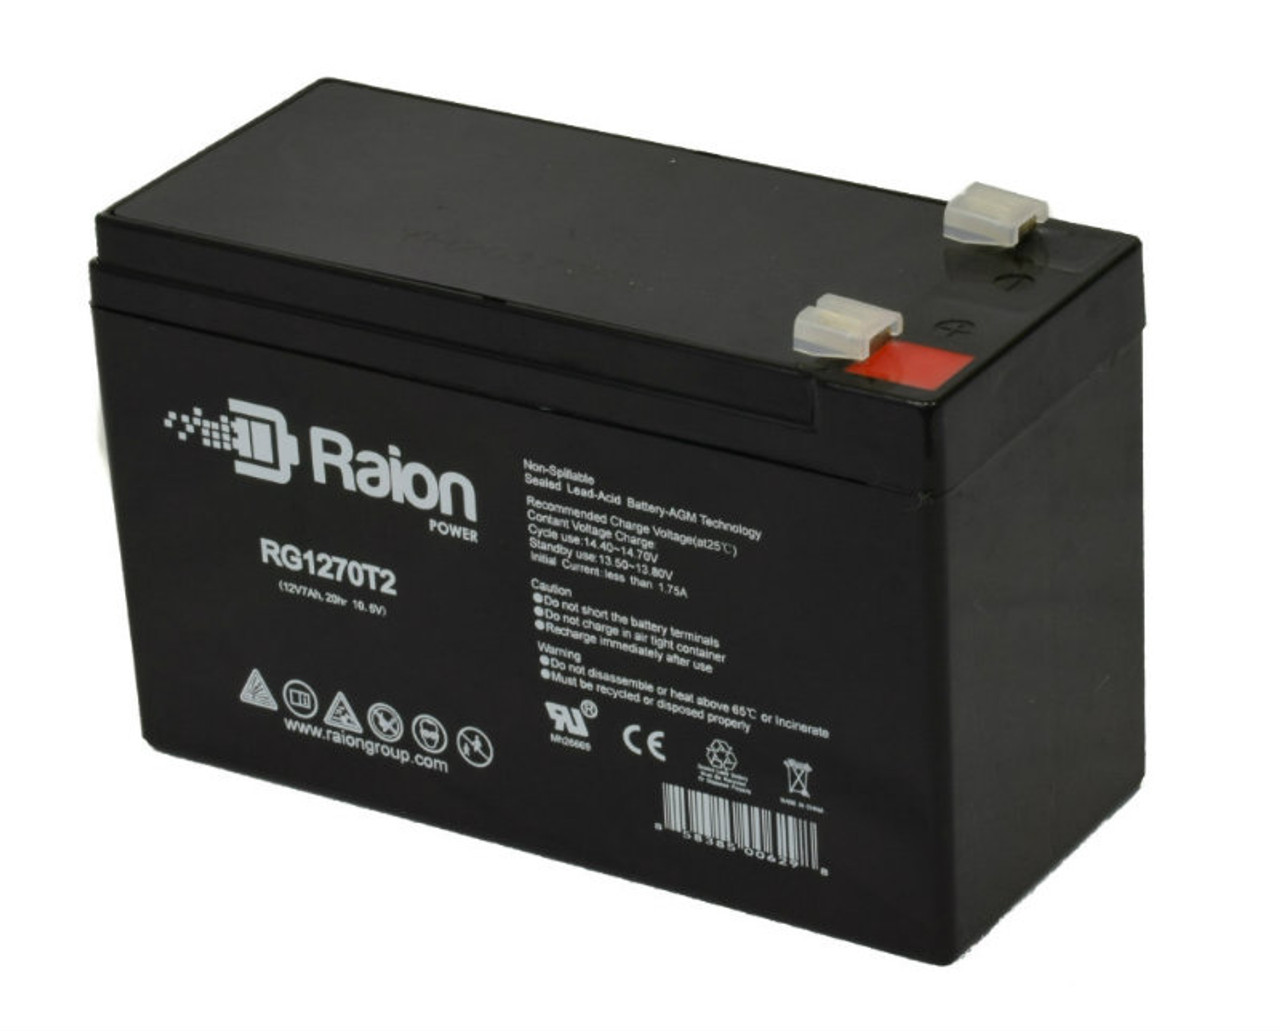 Raion Power RG1270T2 12V 7Ah Rechargeable Battery for CooPower CP12-7.0